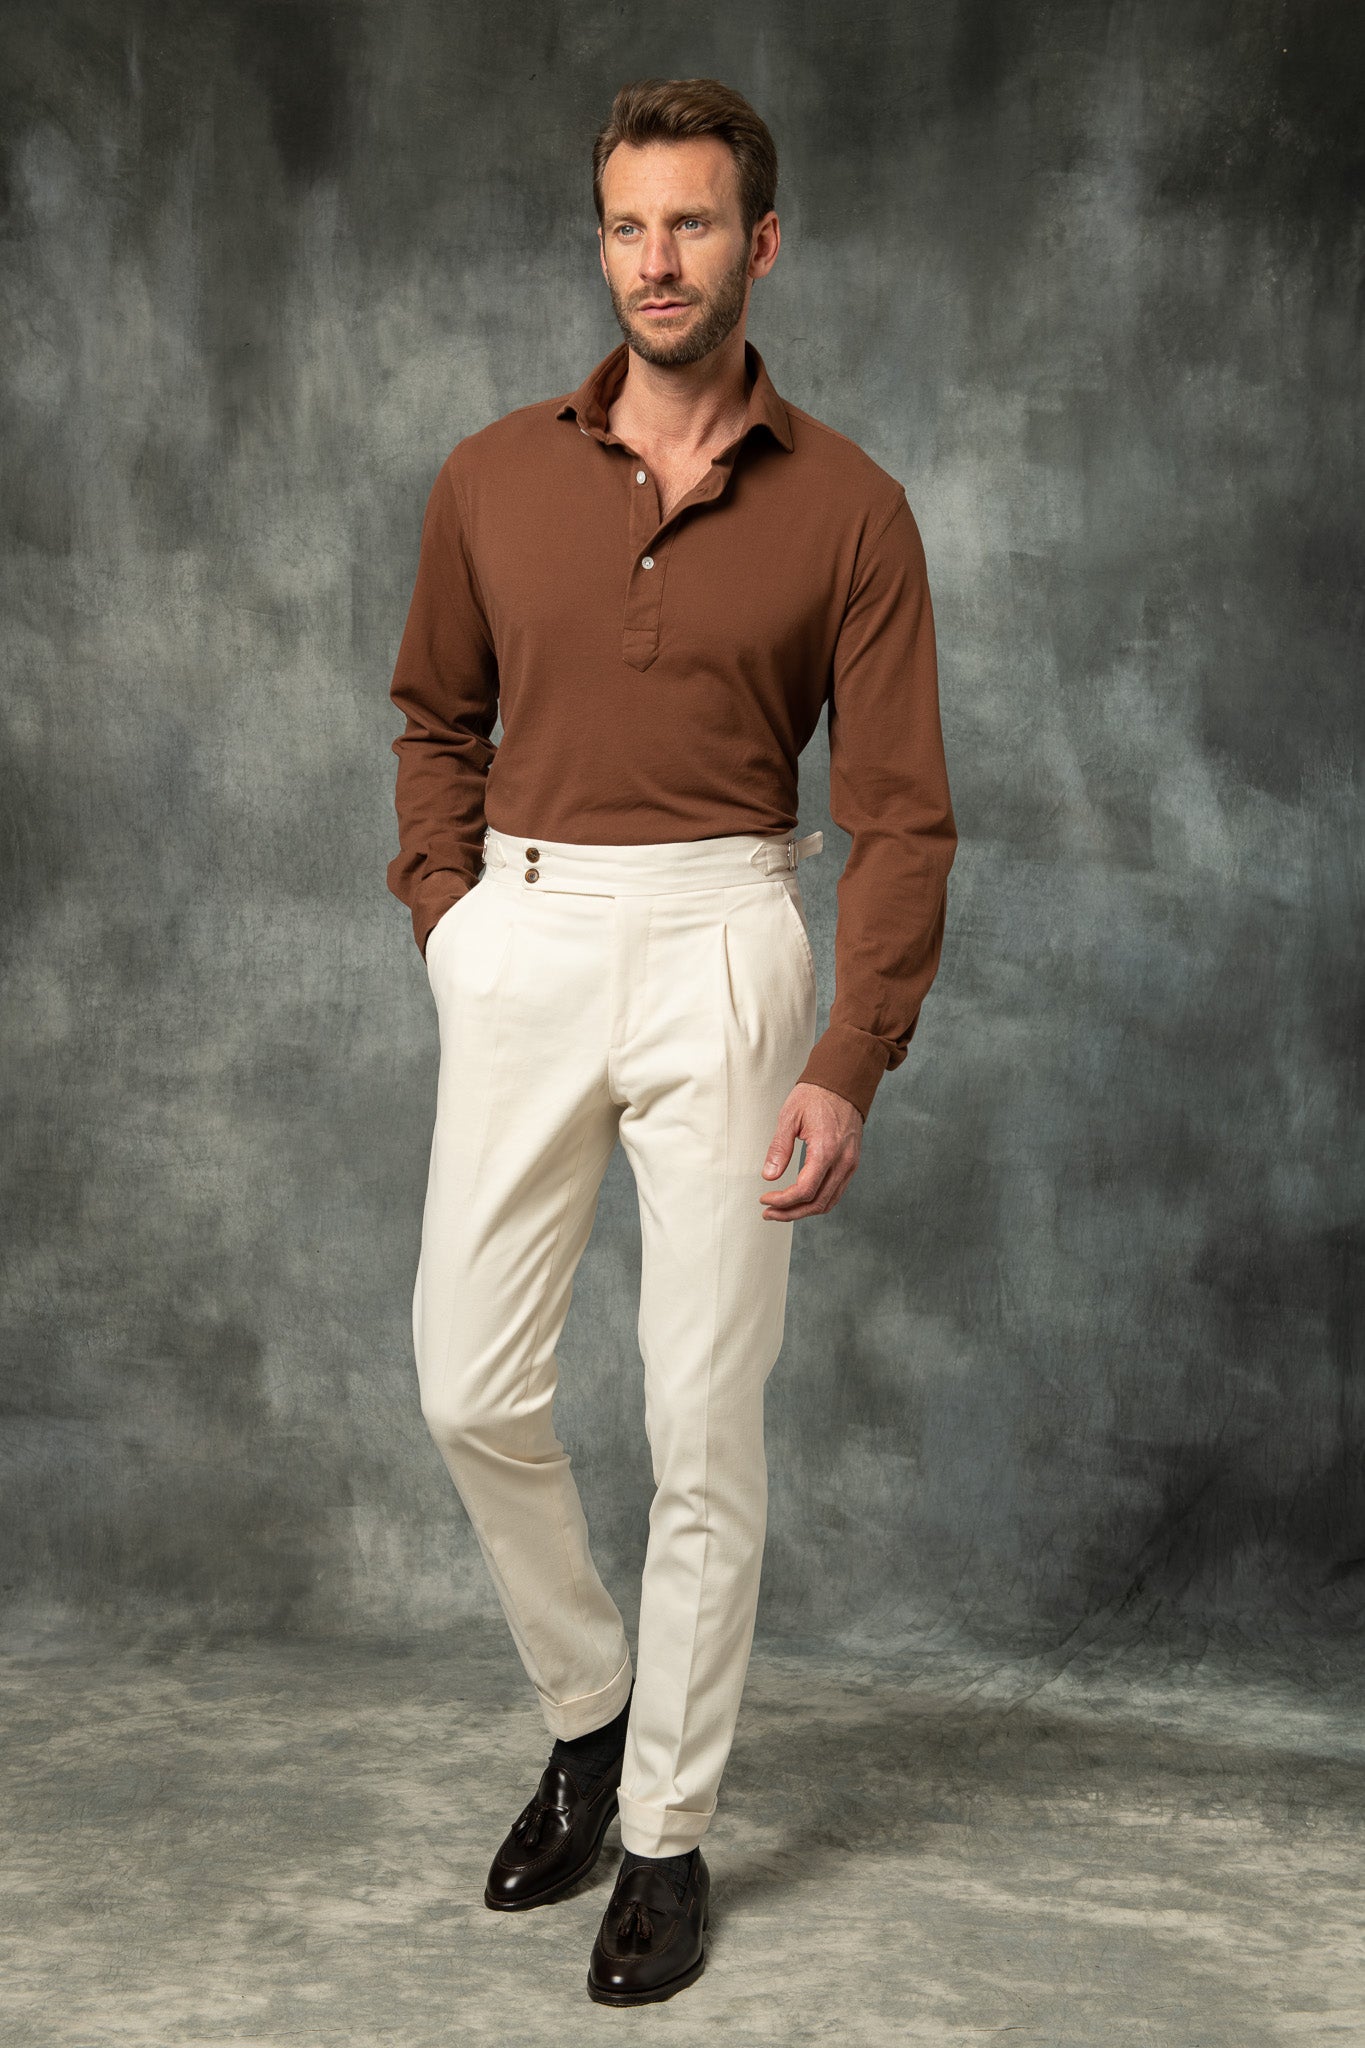 How To Wear Brown Pants With A White Shirt Outfits Tips  Ready Sleek